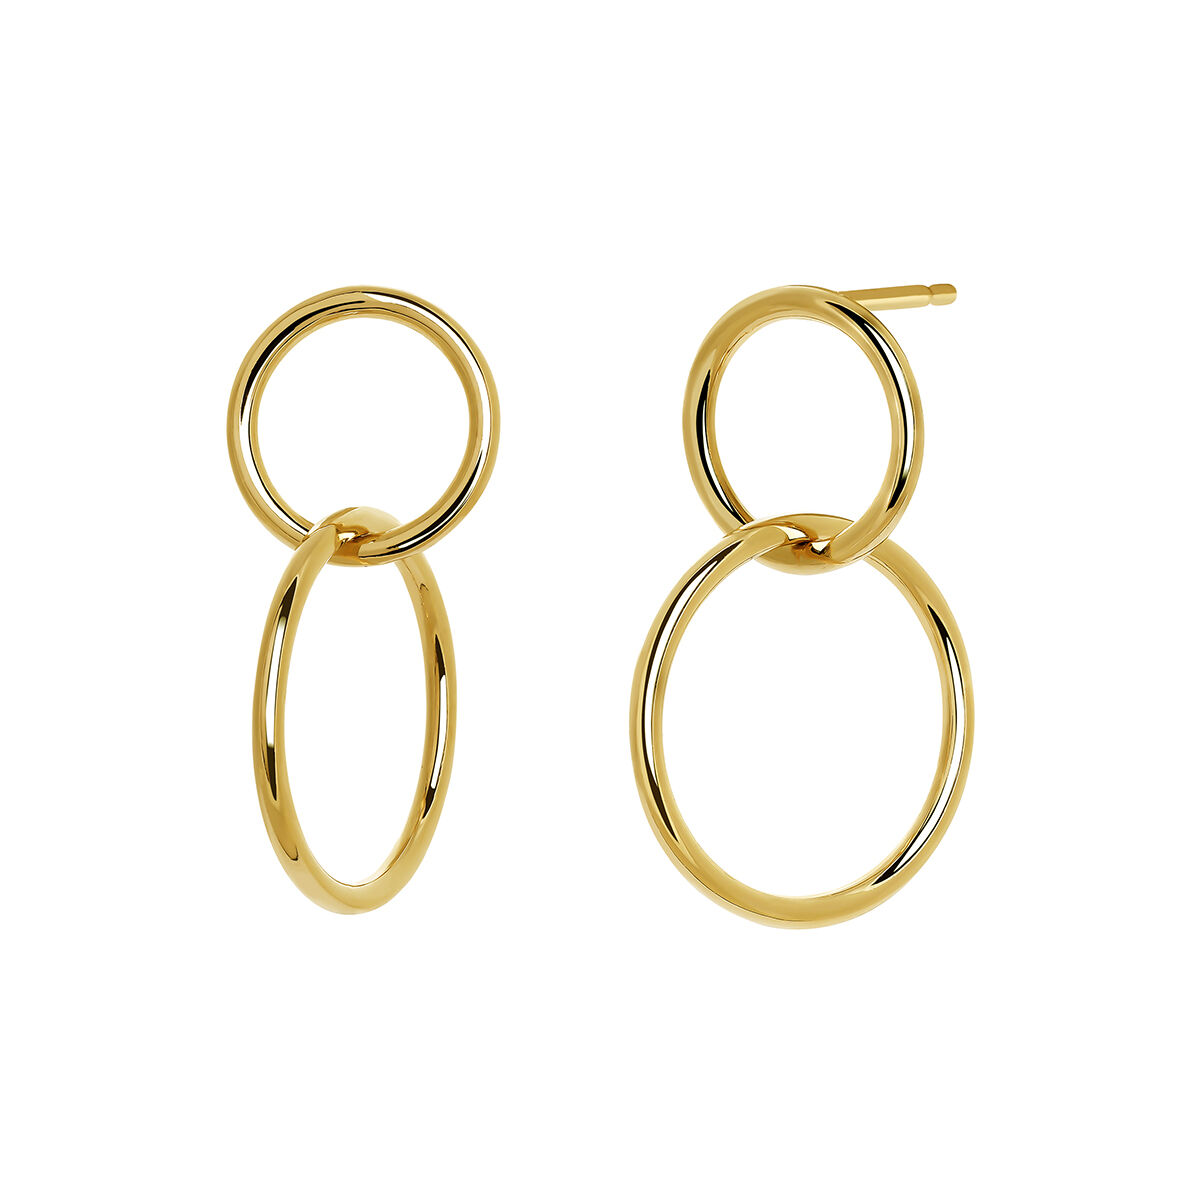 Small gold plated double hoop earrings, J03587-02, hi-res